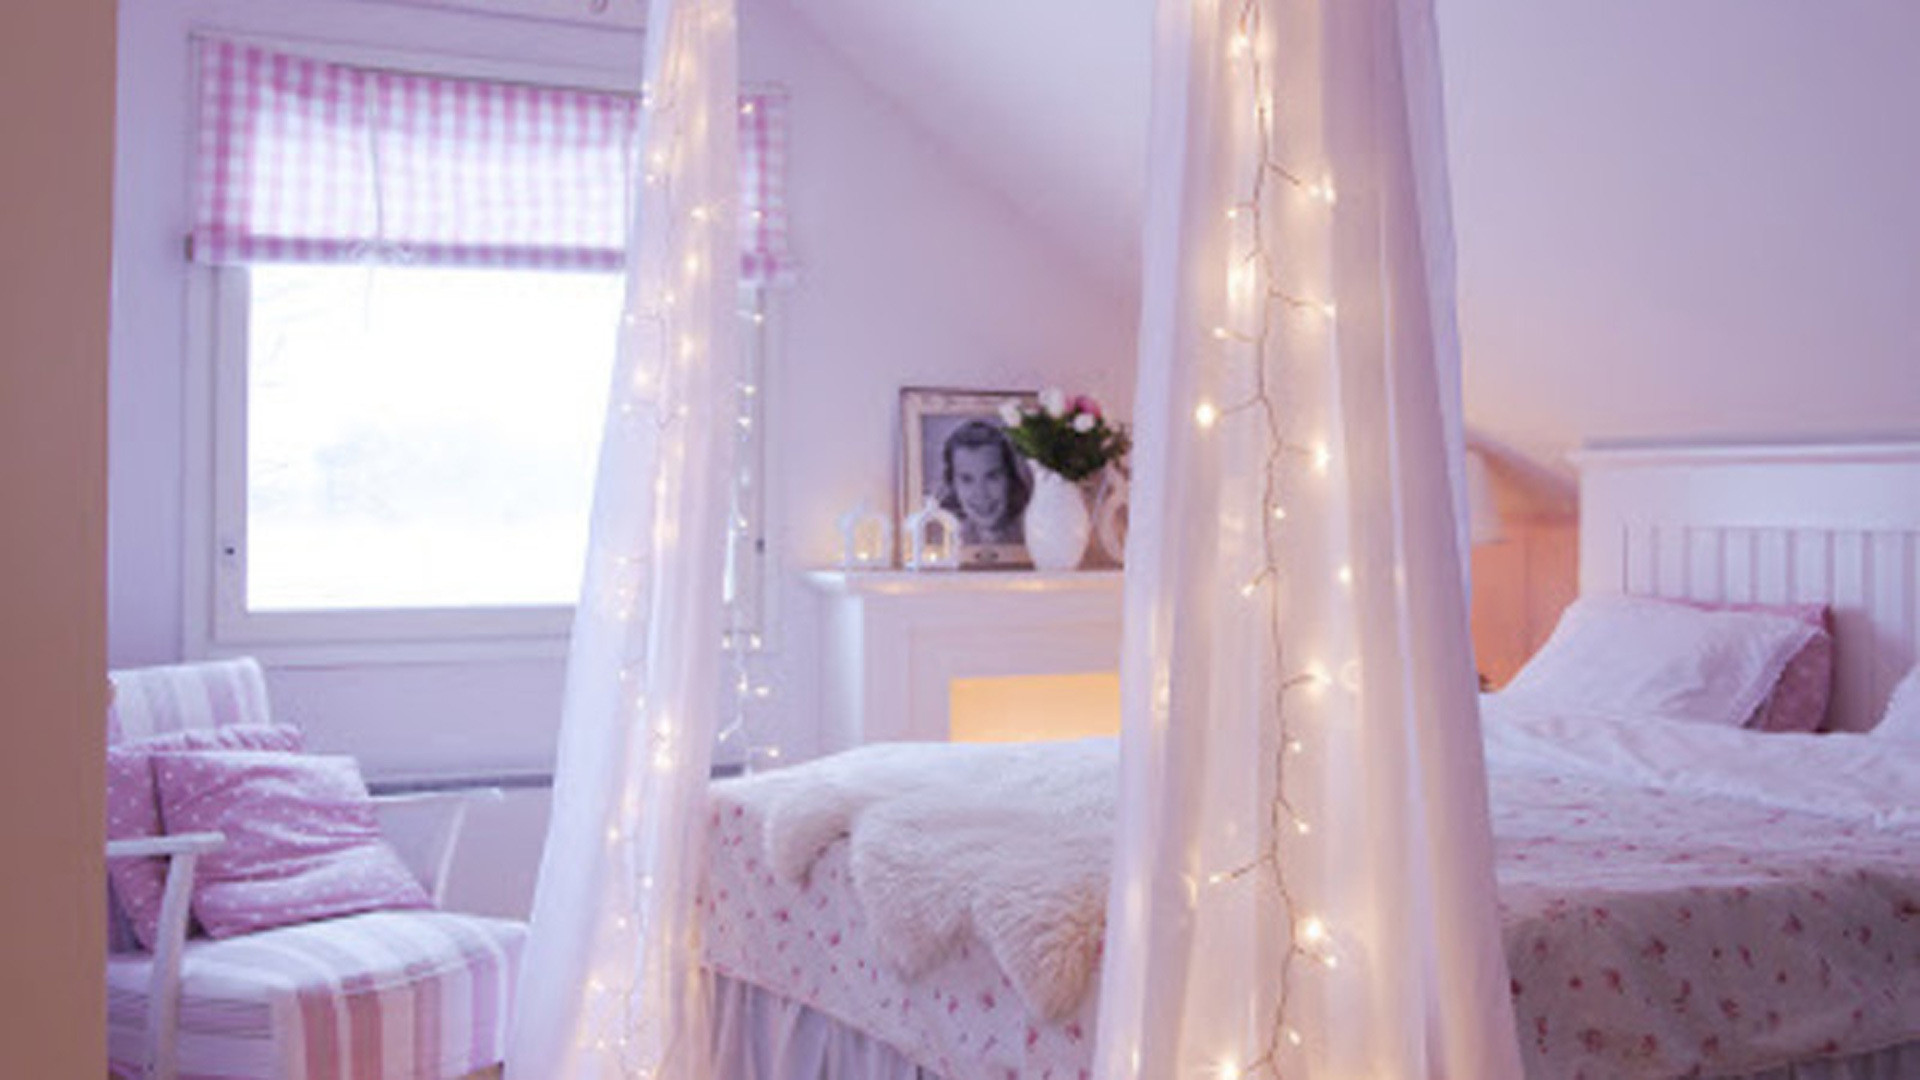 Fairy Light Bedroom
 How to decorate with fairy lights